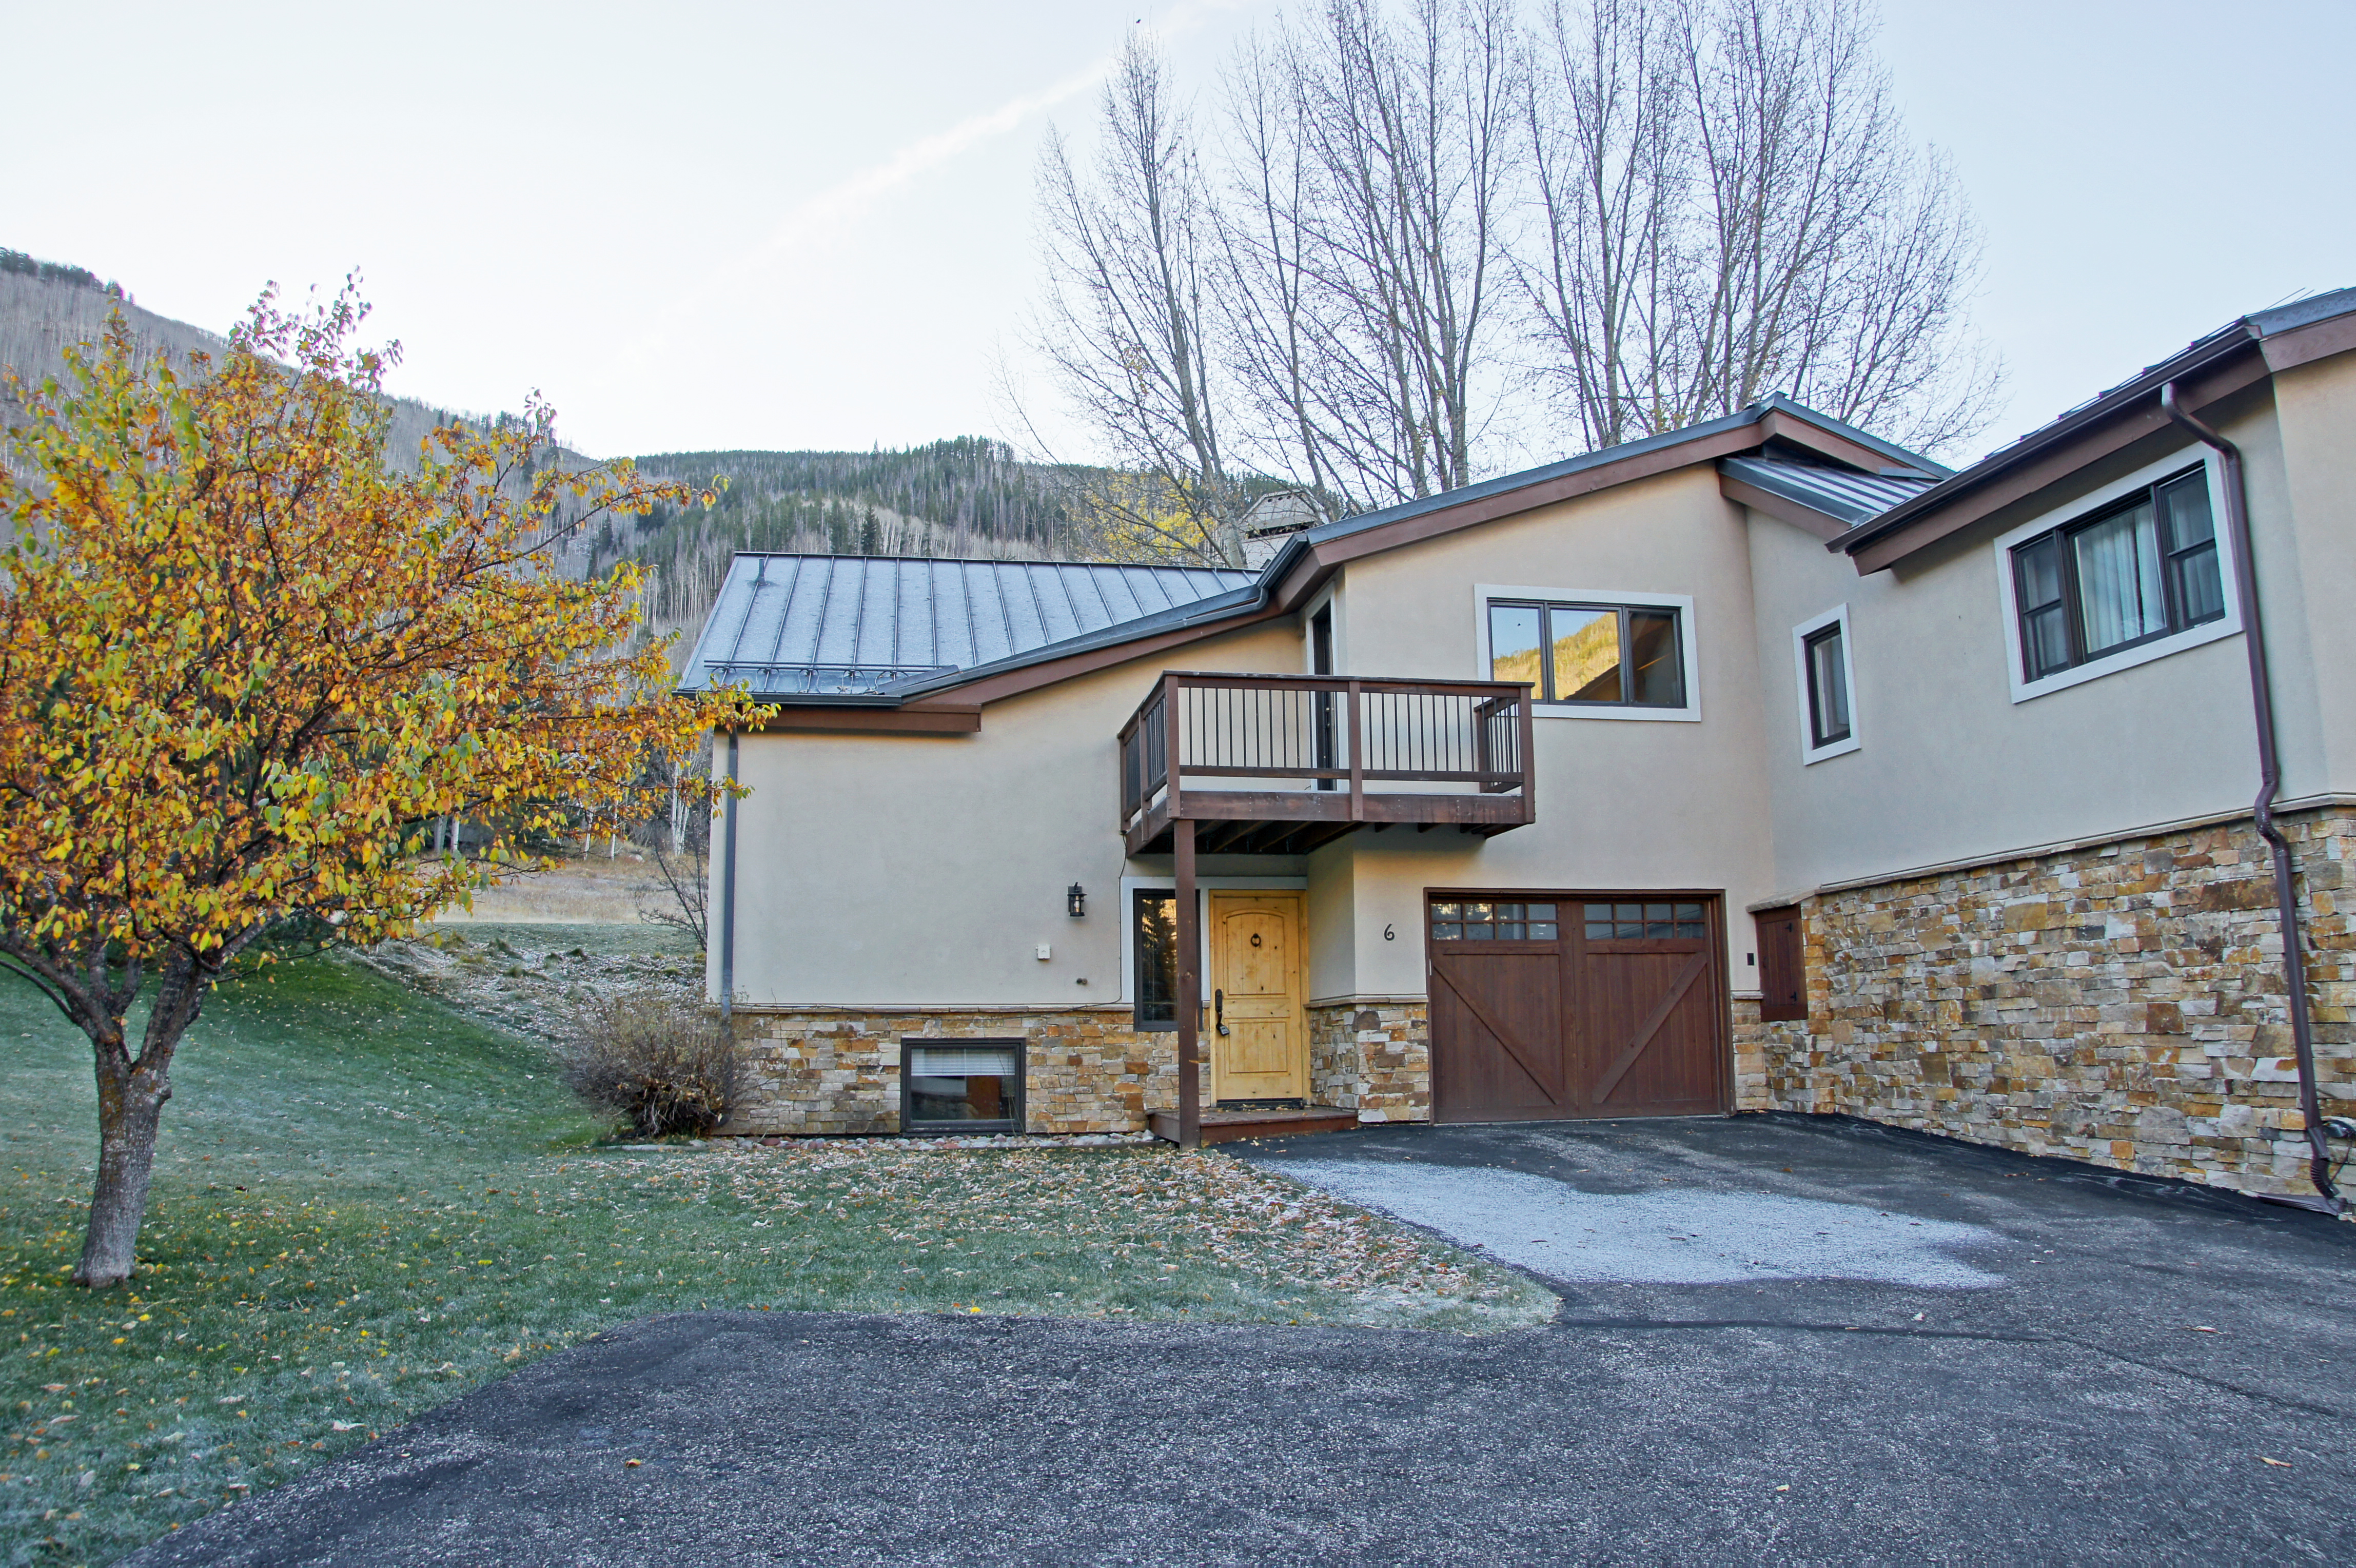 Walking Distance to Vail Bike Path, Affordable Rates, Wood Burning Fireplace